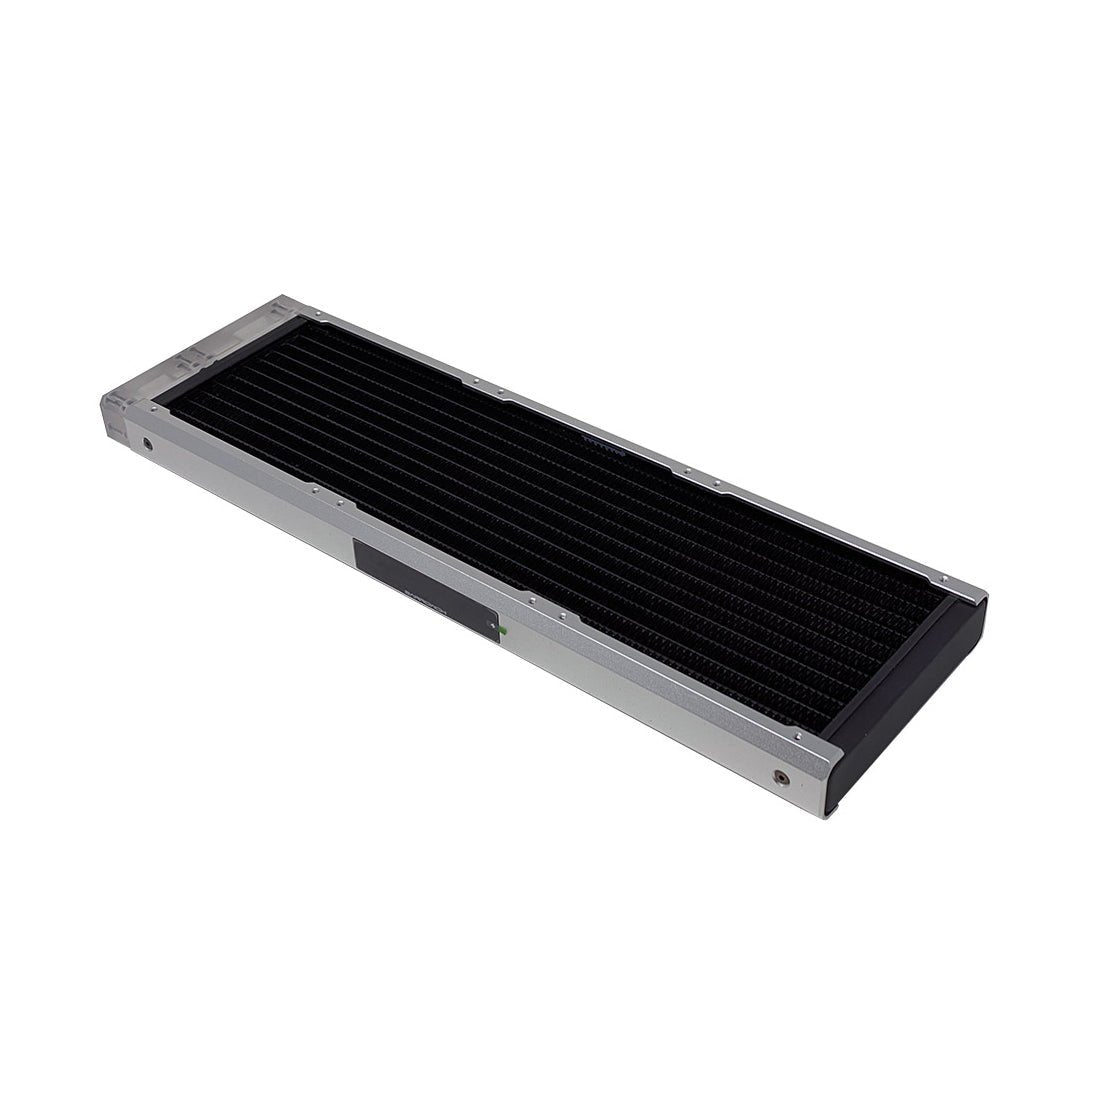 Barrowch Chameleon Fish Series Removable 360mm Radiator with Display Screen PMMA Edition - Silver - Store 974 | ستور ٩٧٤